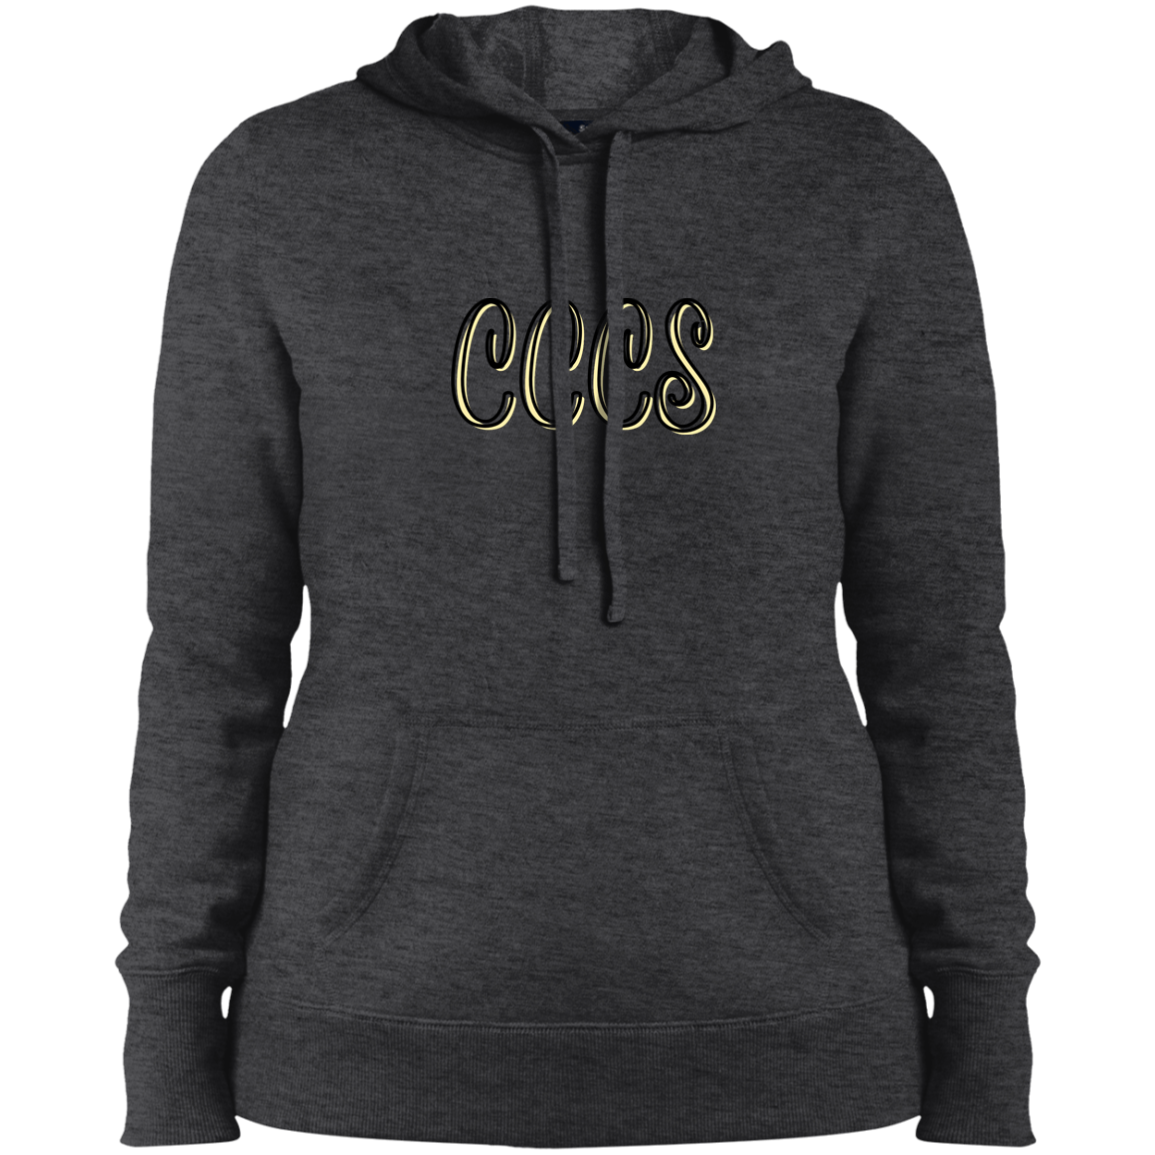 CCCS Lions- Double sided Ladies' Pullover Hooded Sweatshirt